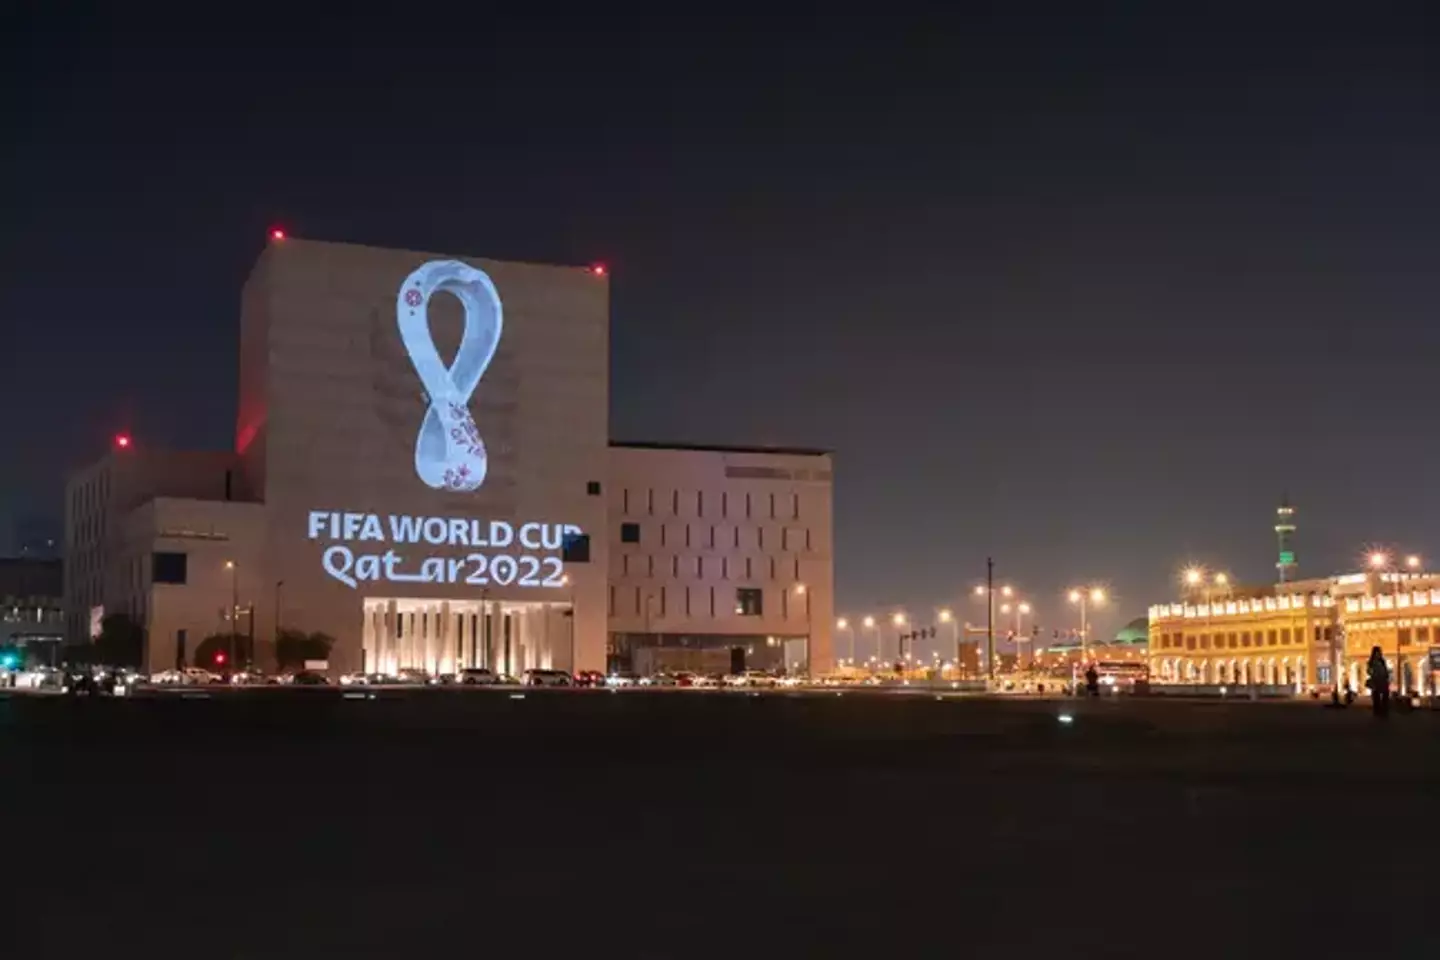 The 2022 Qatar World Cup will be played in the winter.